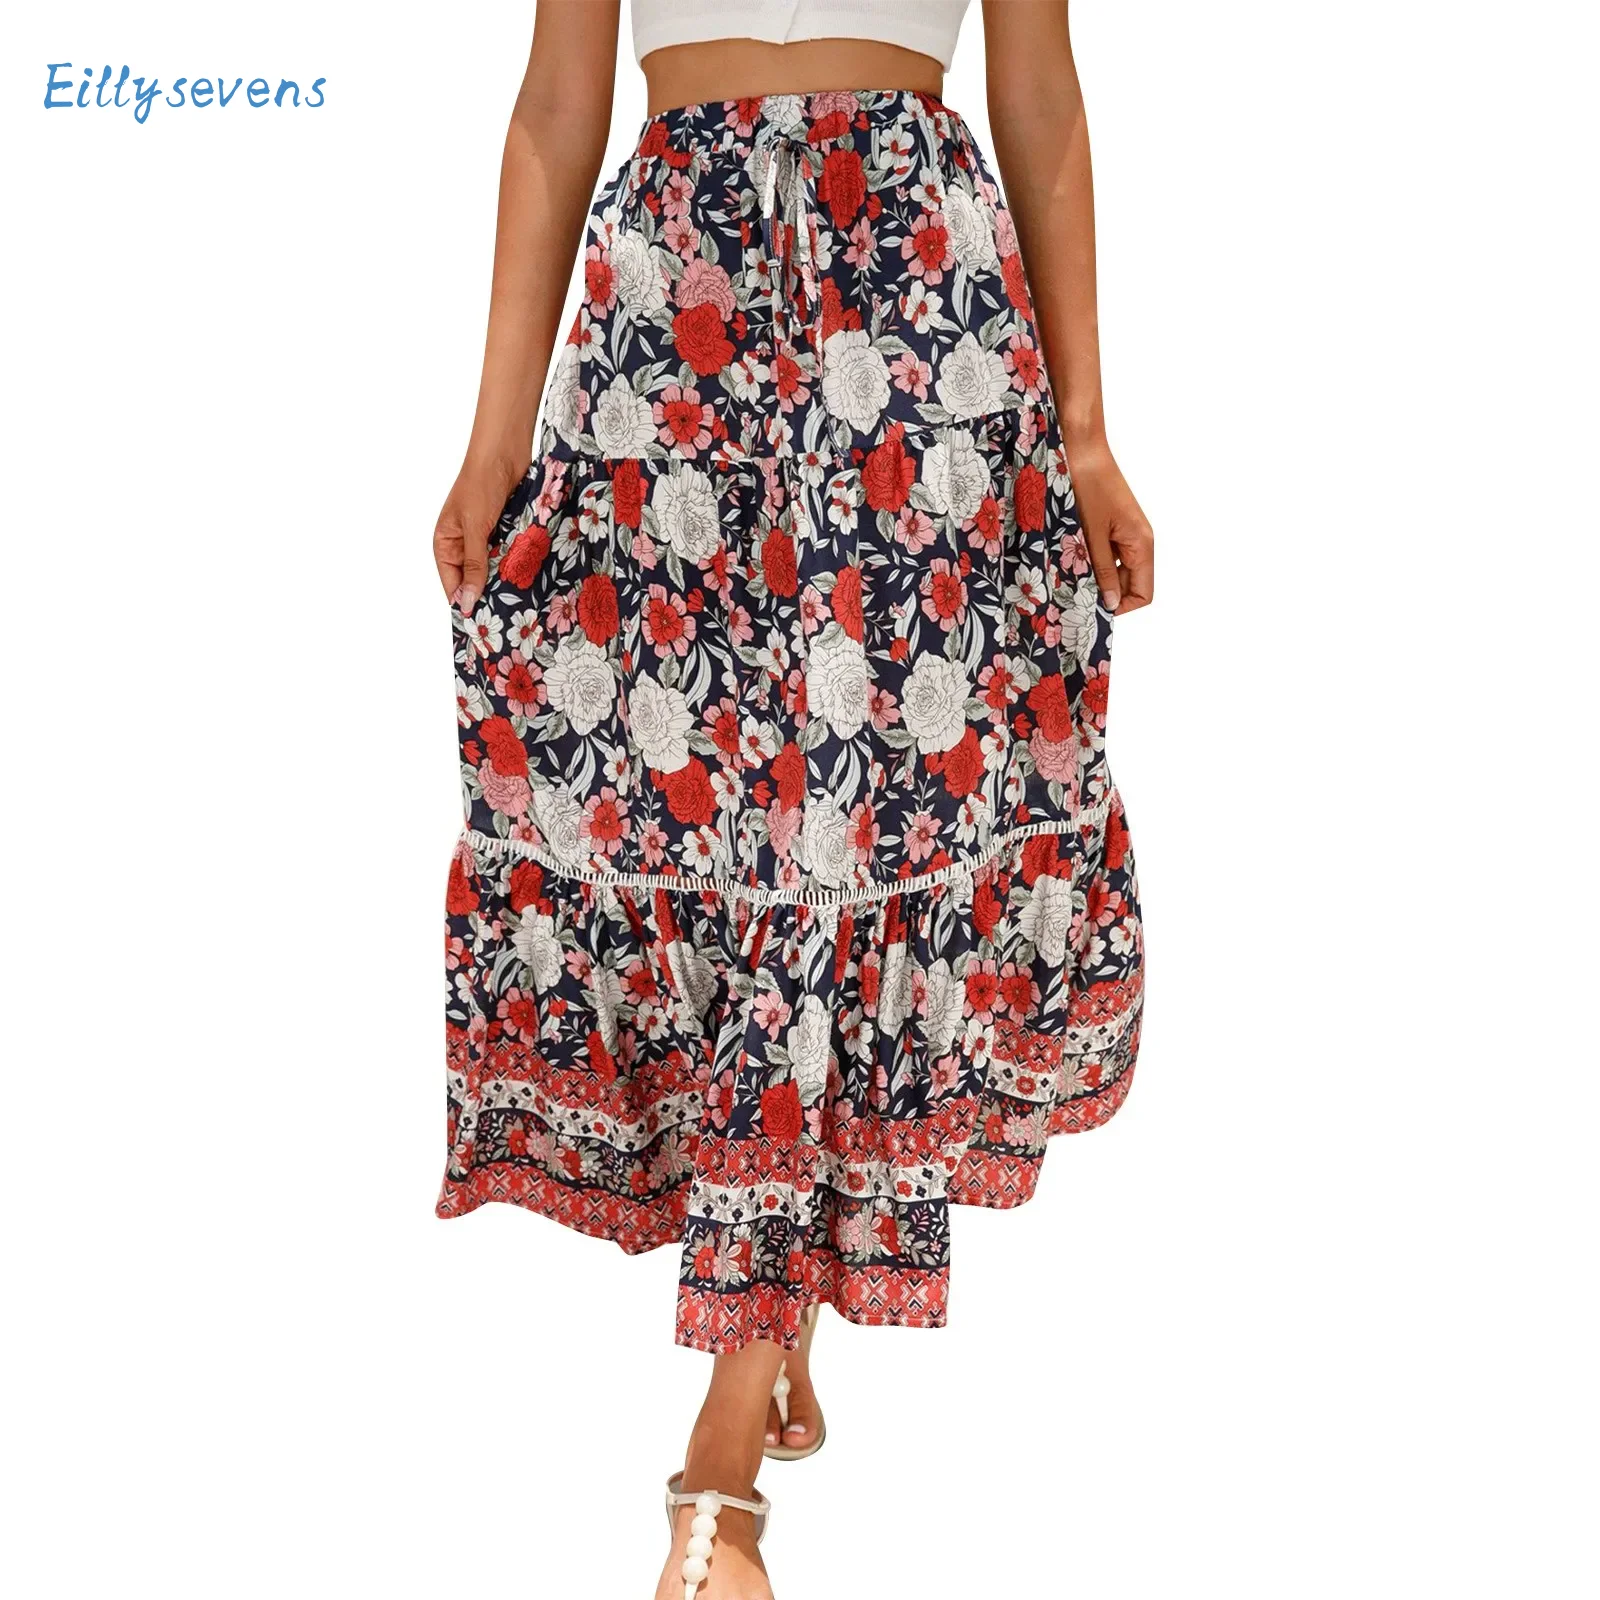 

Women'S New Lace Splicing Long Skirts Fashion Trend Leisure Vacation Flowy Skirts Flower Printed Elastic Waist A-Line Skirts